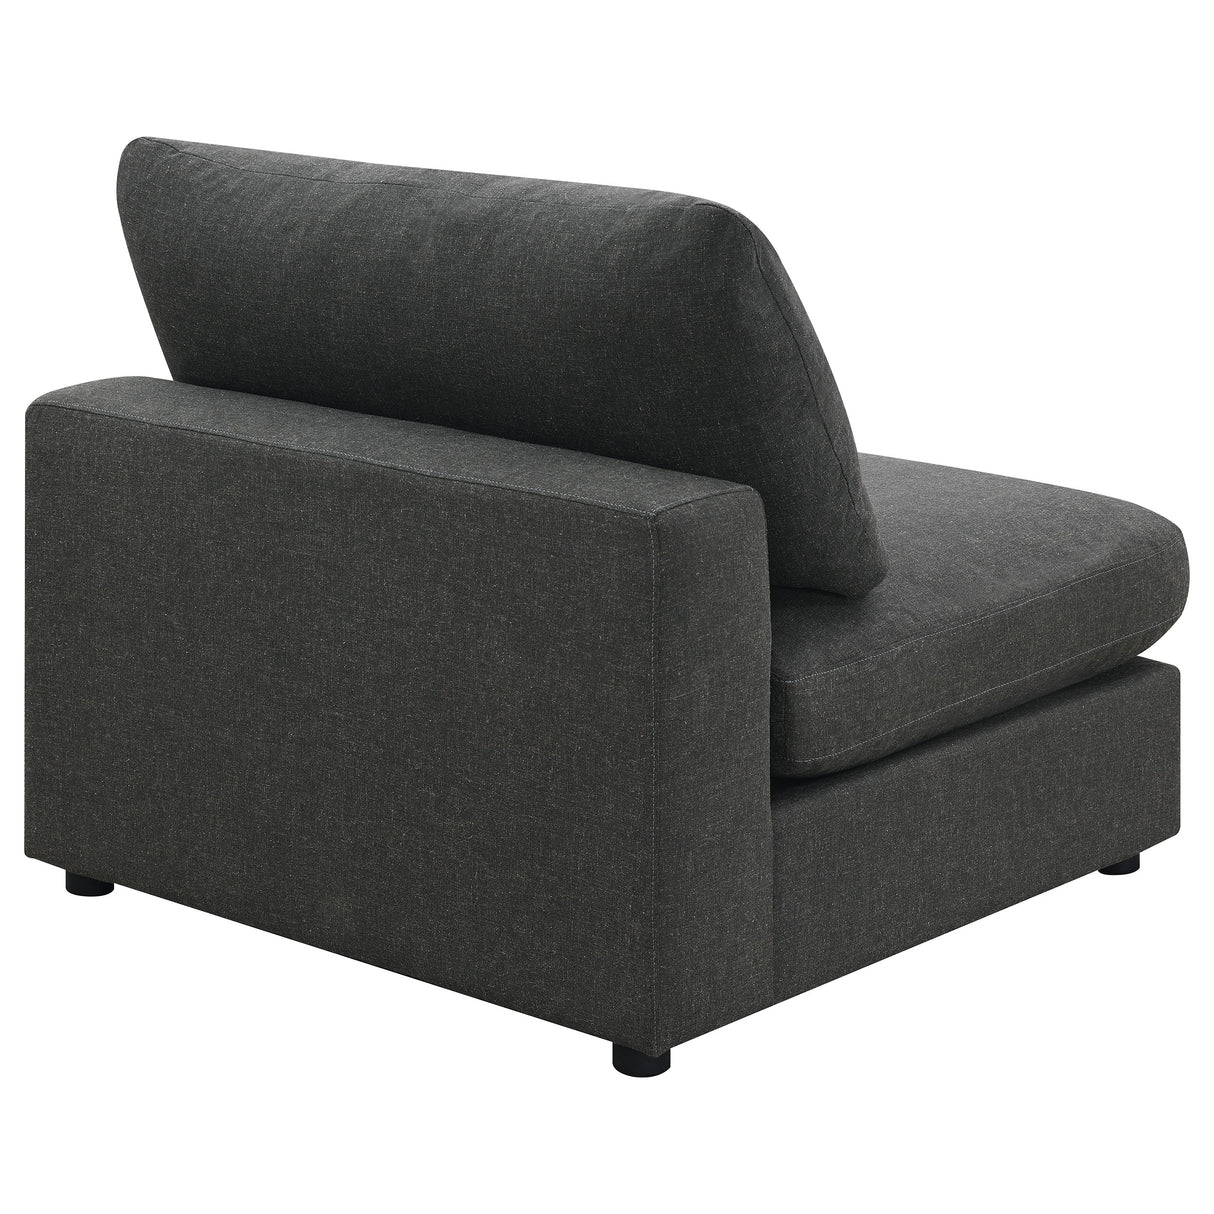 Armless Chair - Serene Upholstered Armless Chair Charcoal